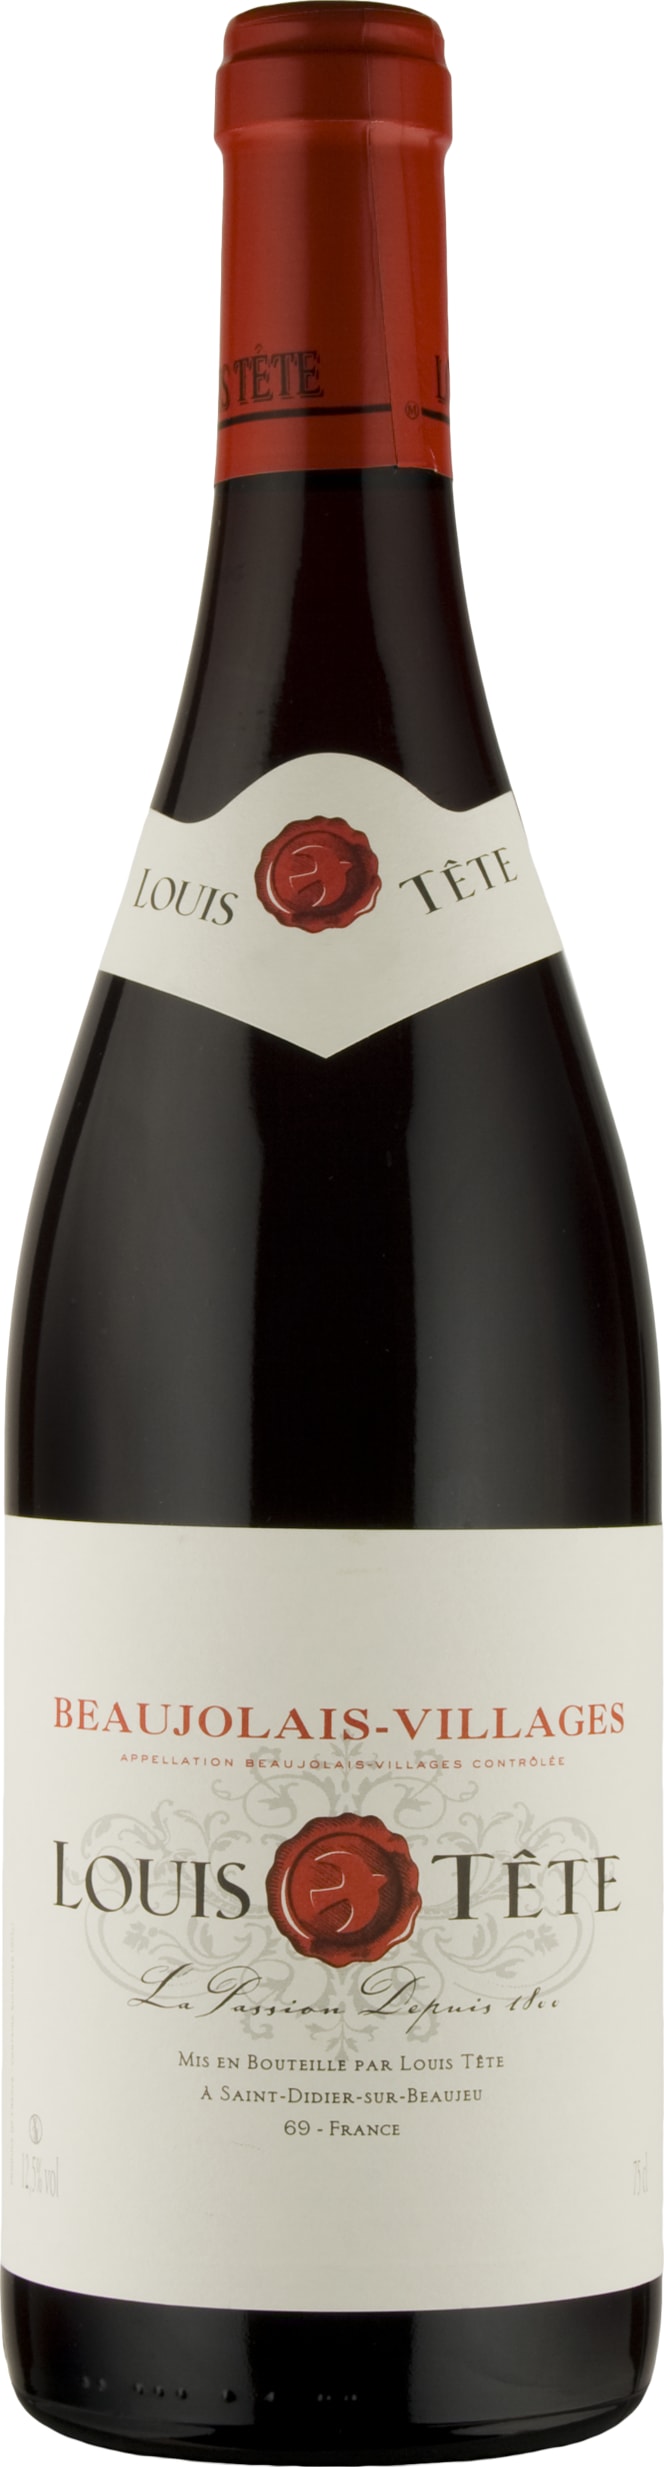 Louis Tete Beaujolais Villages 2022 75cl - Buy Louis Tete Wines from GREAT WINES DIRECT wine shop